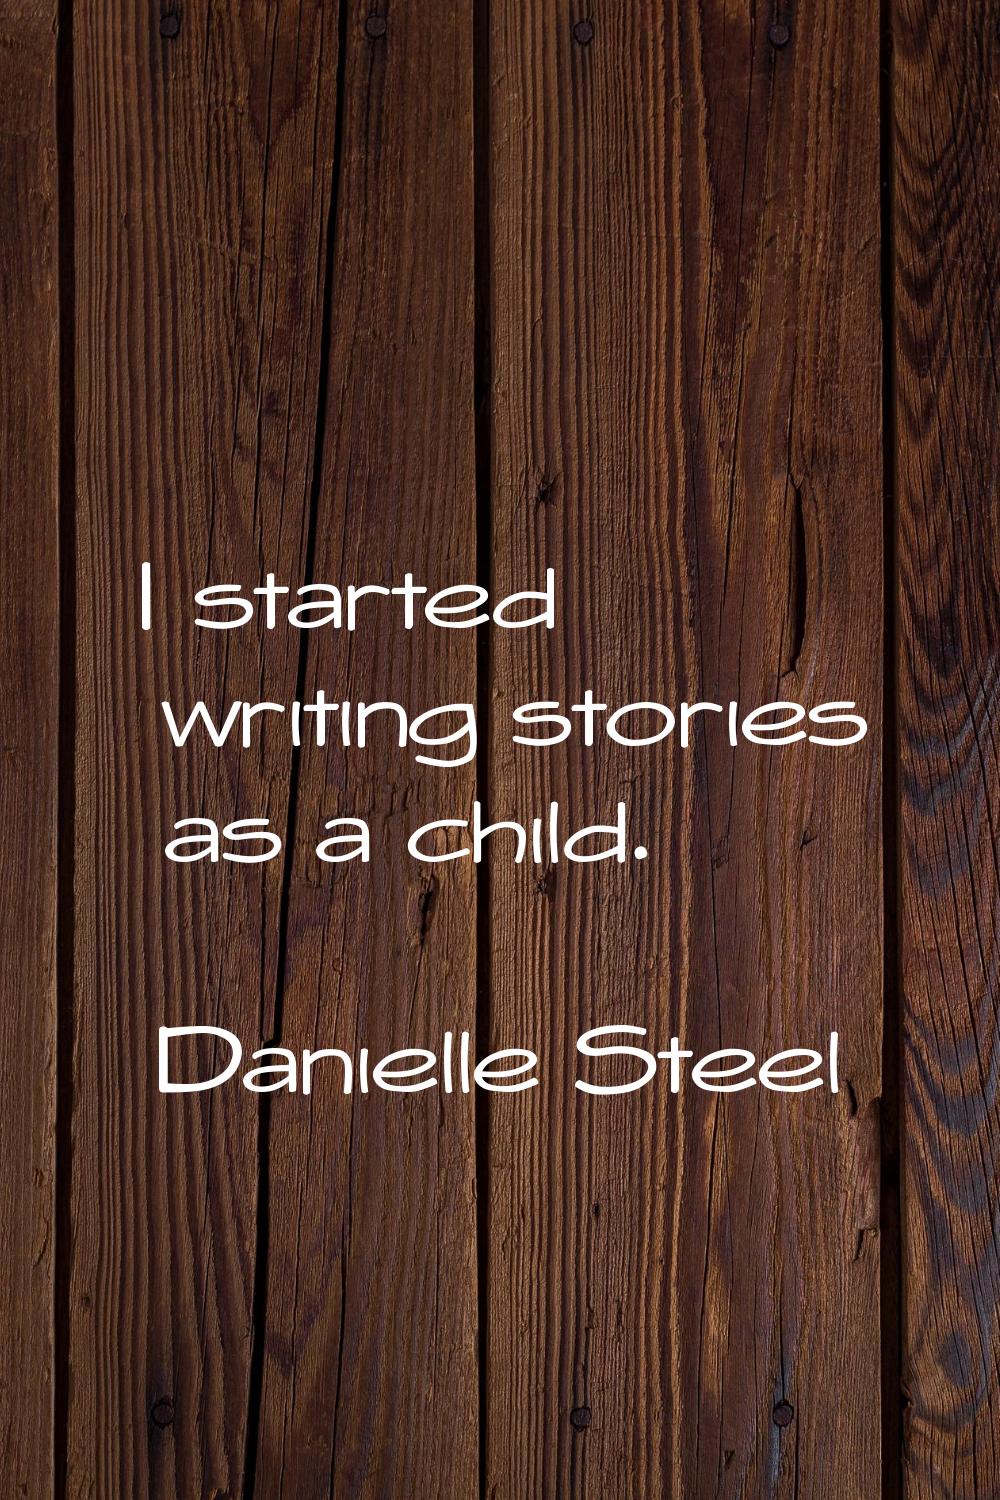 I started writing stories as a child.